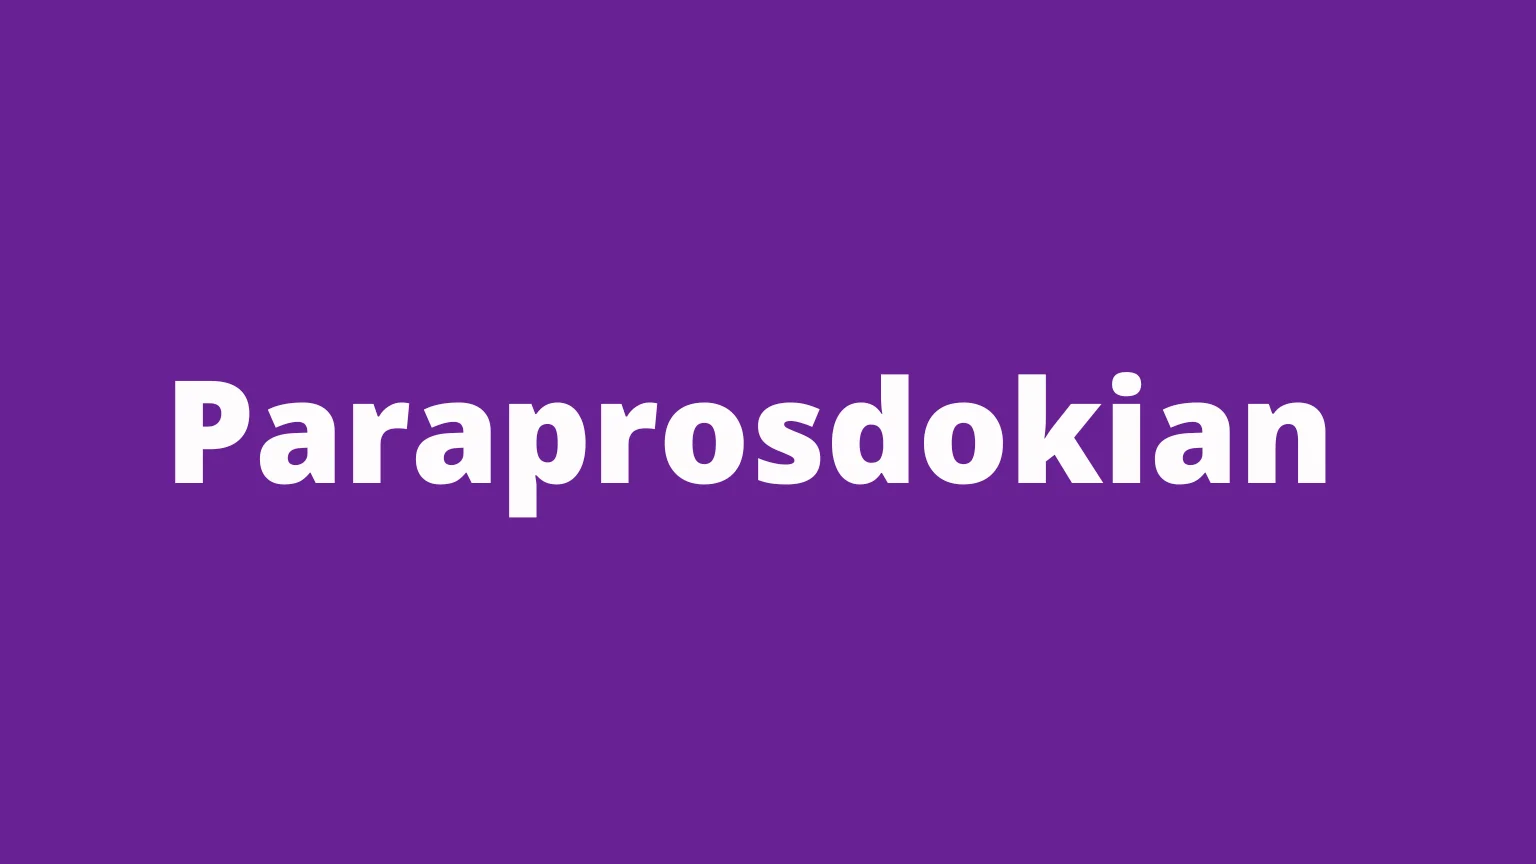 The word paraprosdokian and its meaning